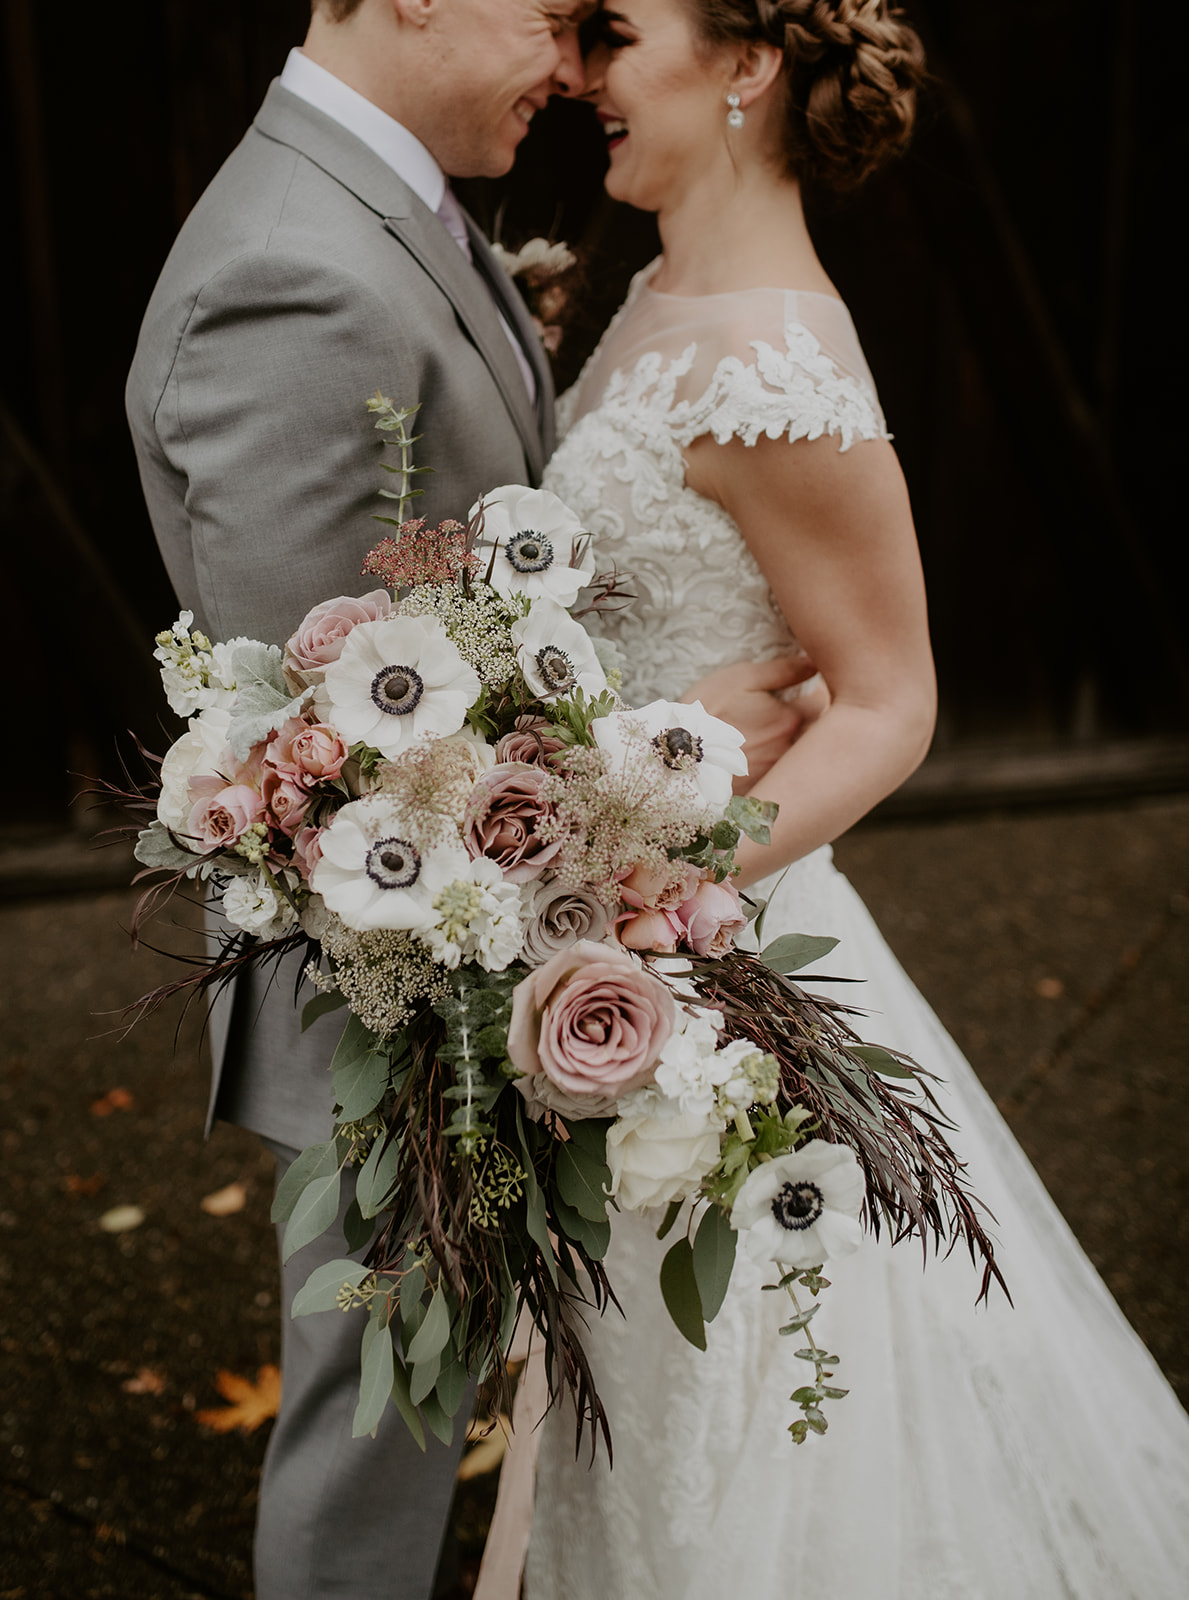 A couple embracing and holding a wedding bouquet